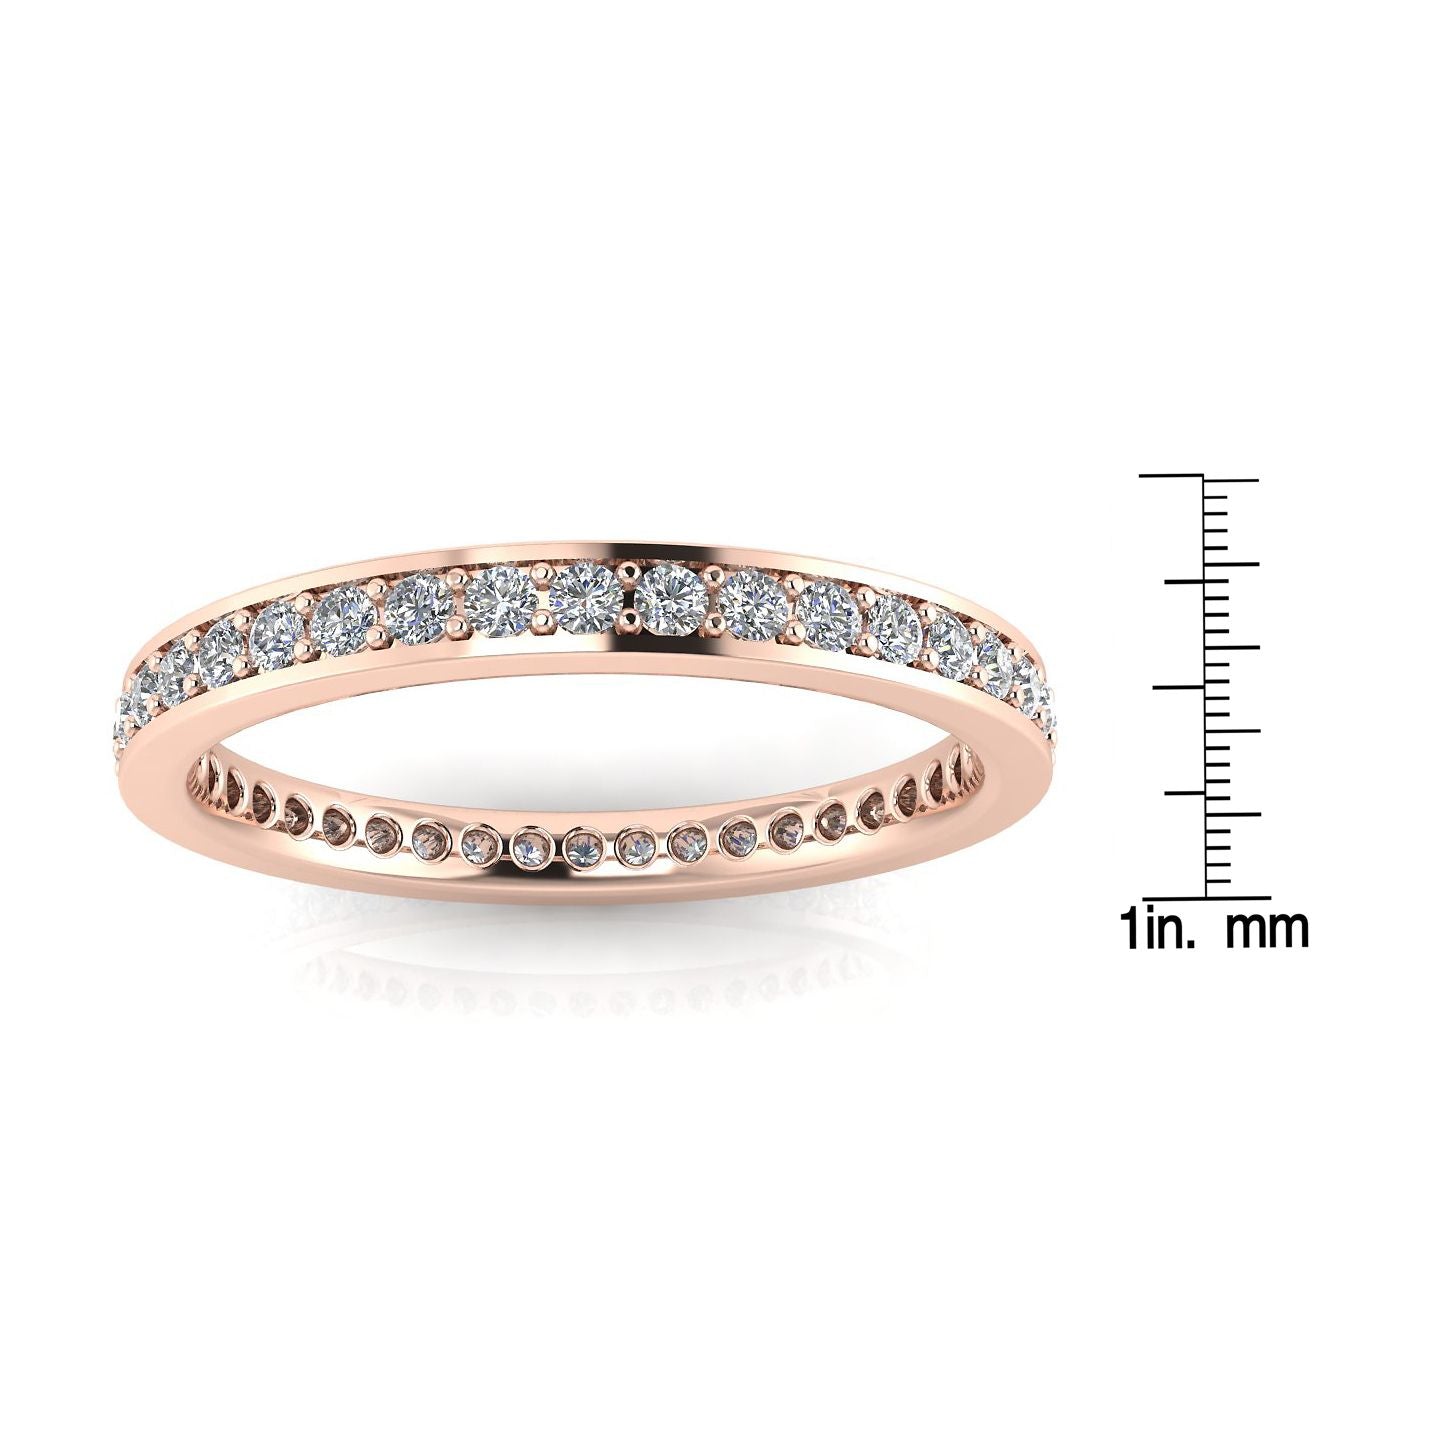 Round Brilliant Cut Diamond Channel Pave Set Eternity Ring In 14k Rose Gold  (0.7ct. Tw.) Ring Size 6.5